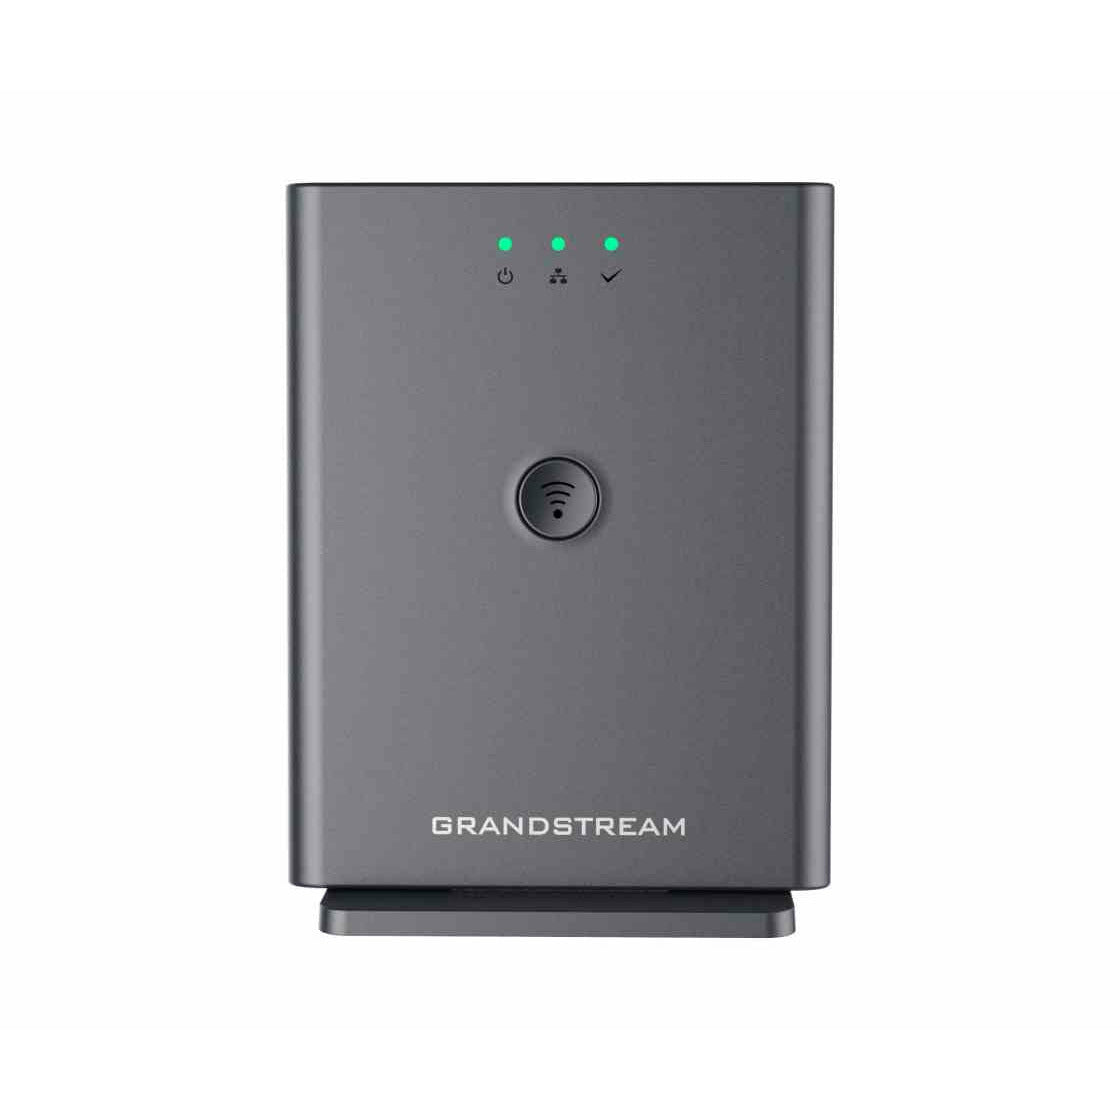 GRANDSTREAM DP752 DECT Base Station, Pairs w/ 5 DP Series DECT Handsets, Range up to 400 meters, Supports Push-to-Talk